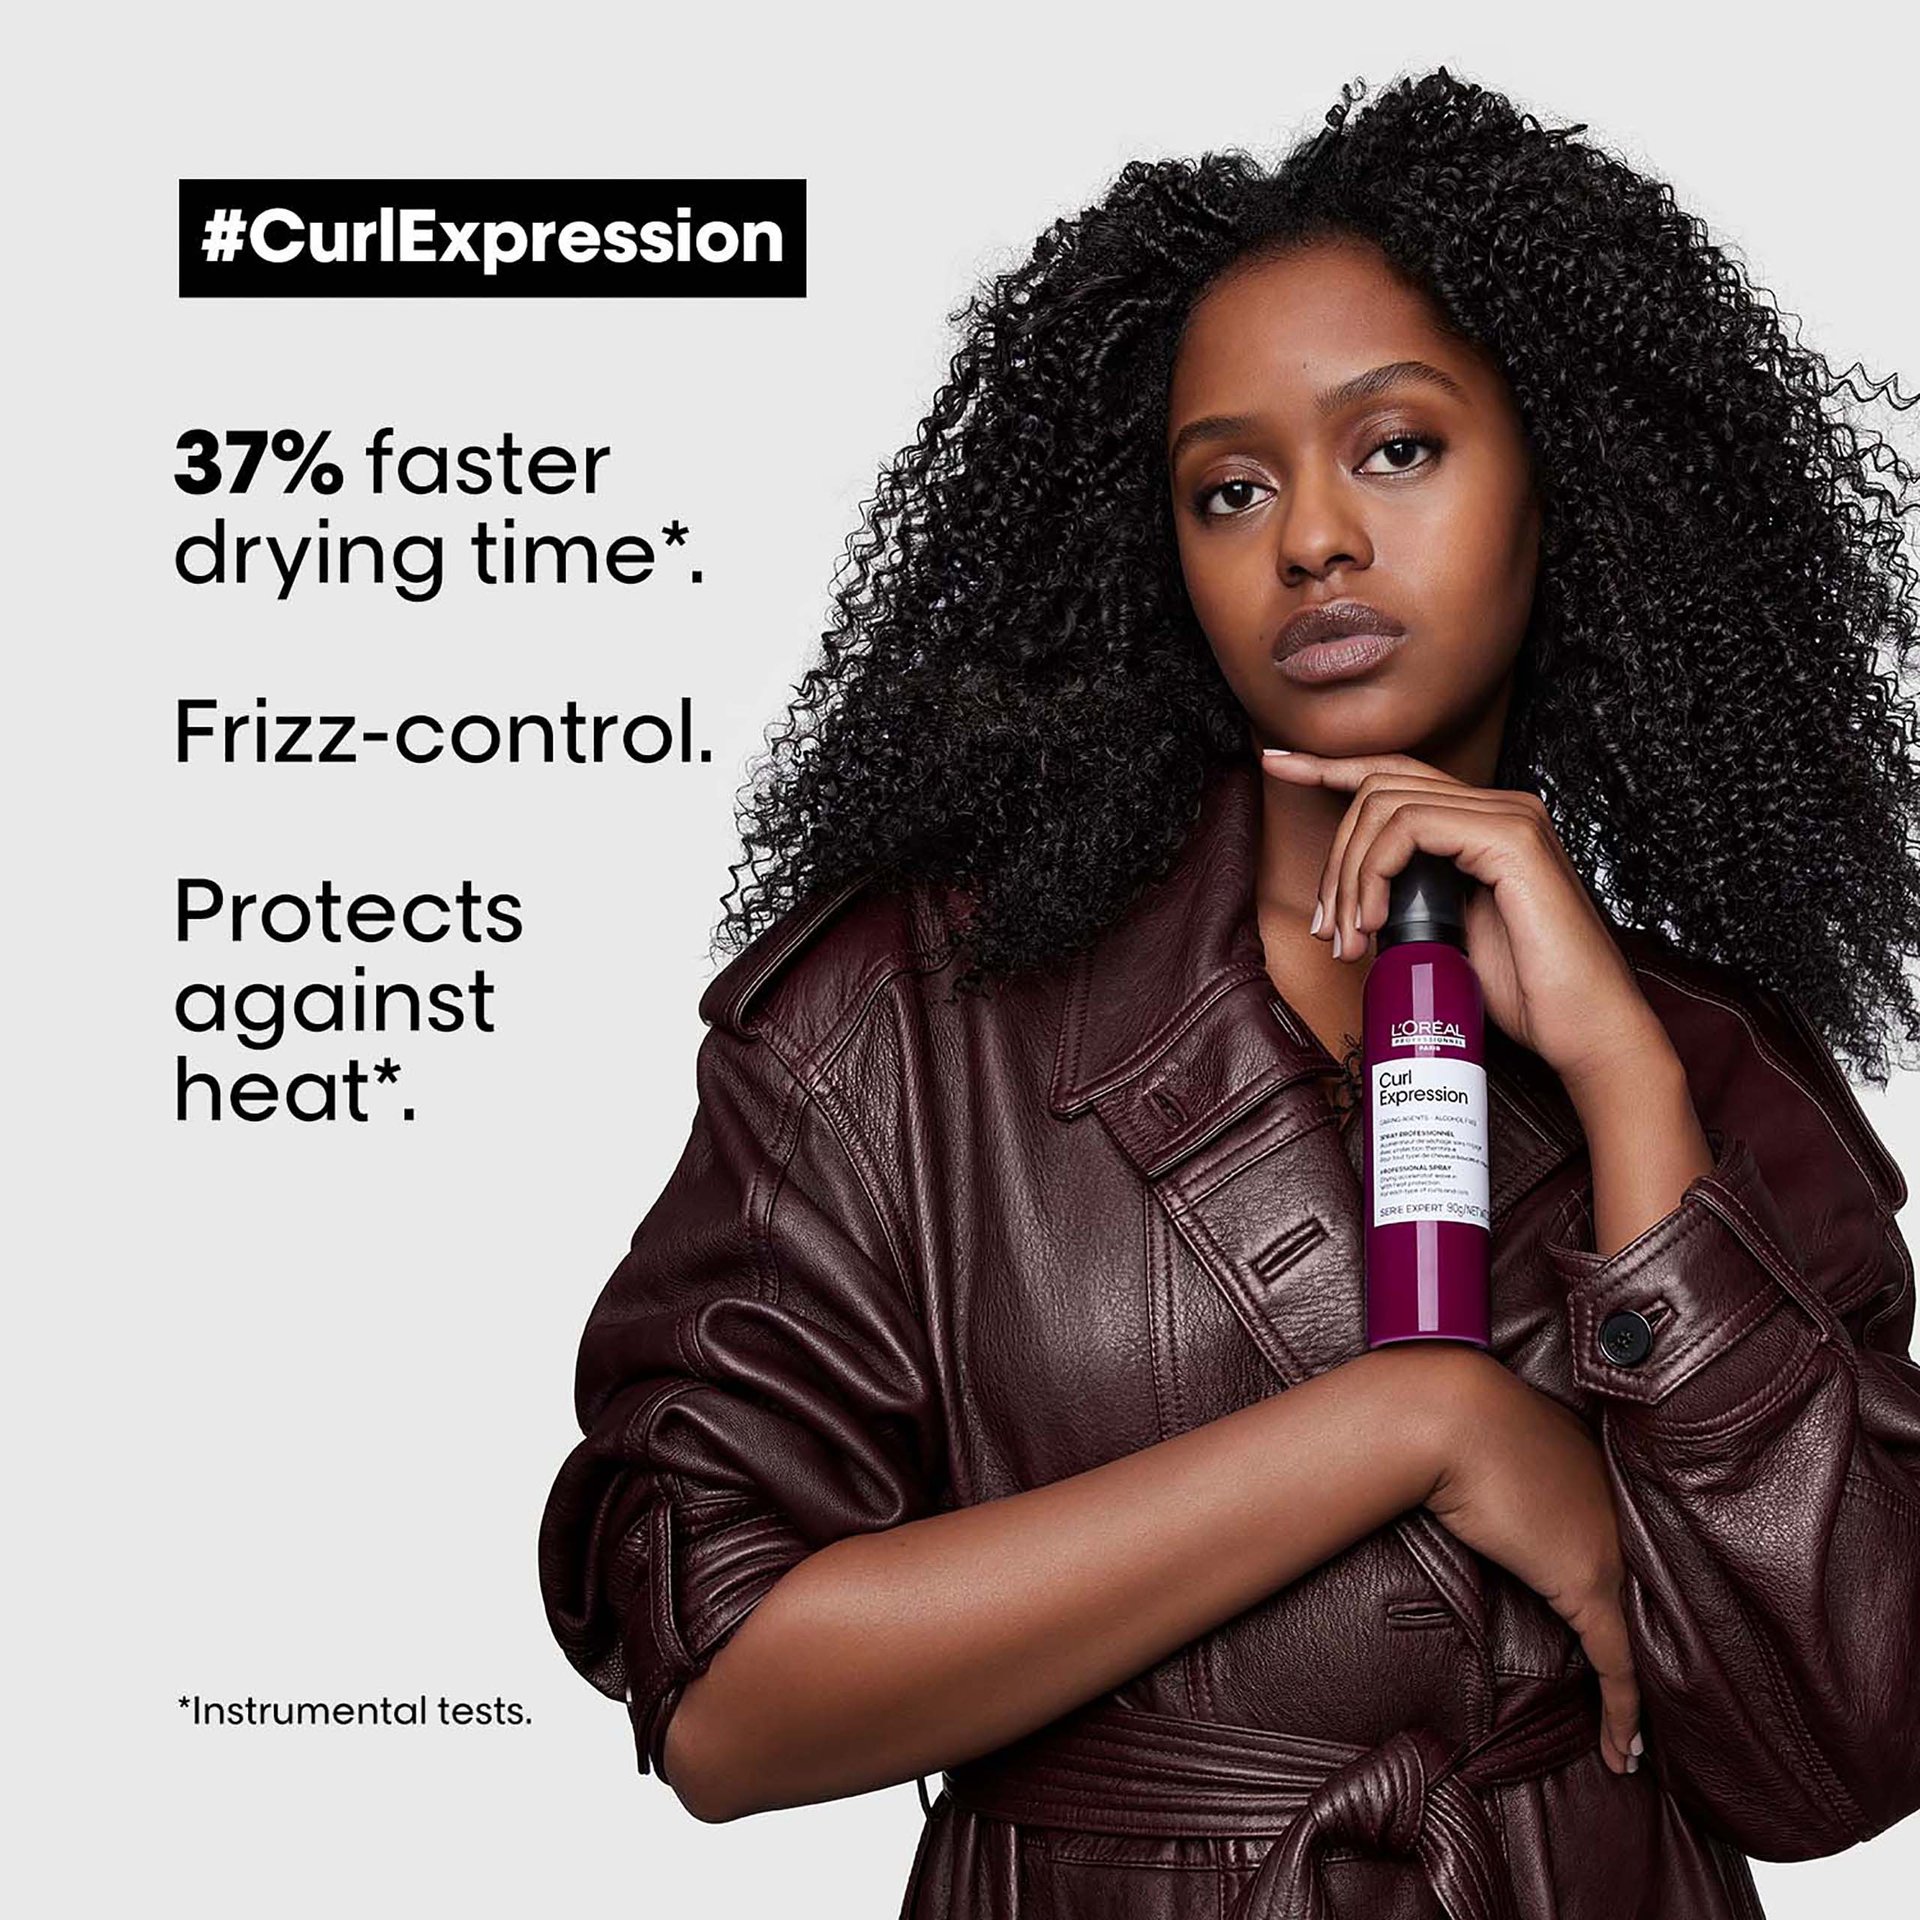 curl-expression-drying-accelerator2